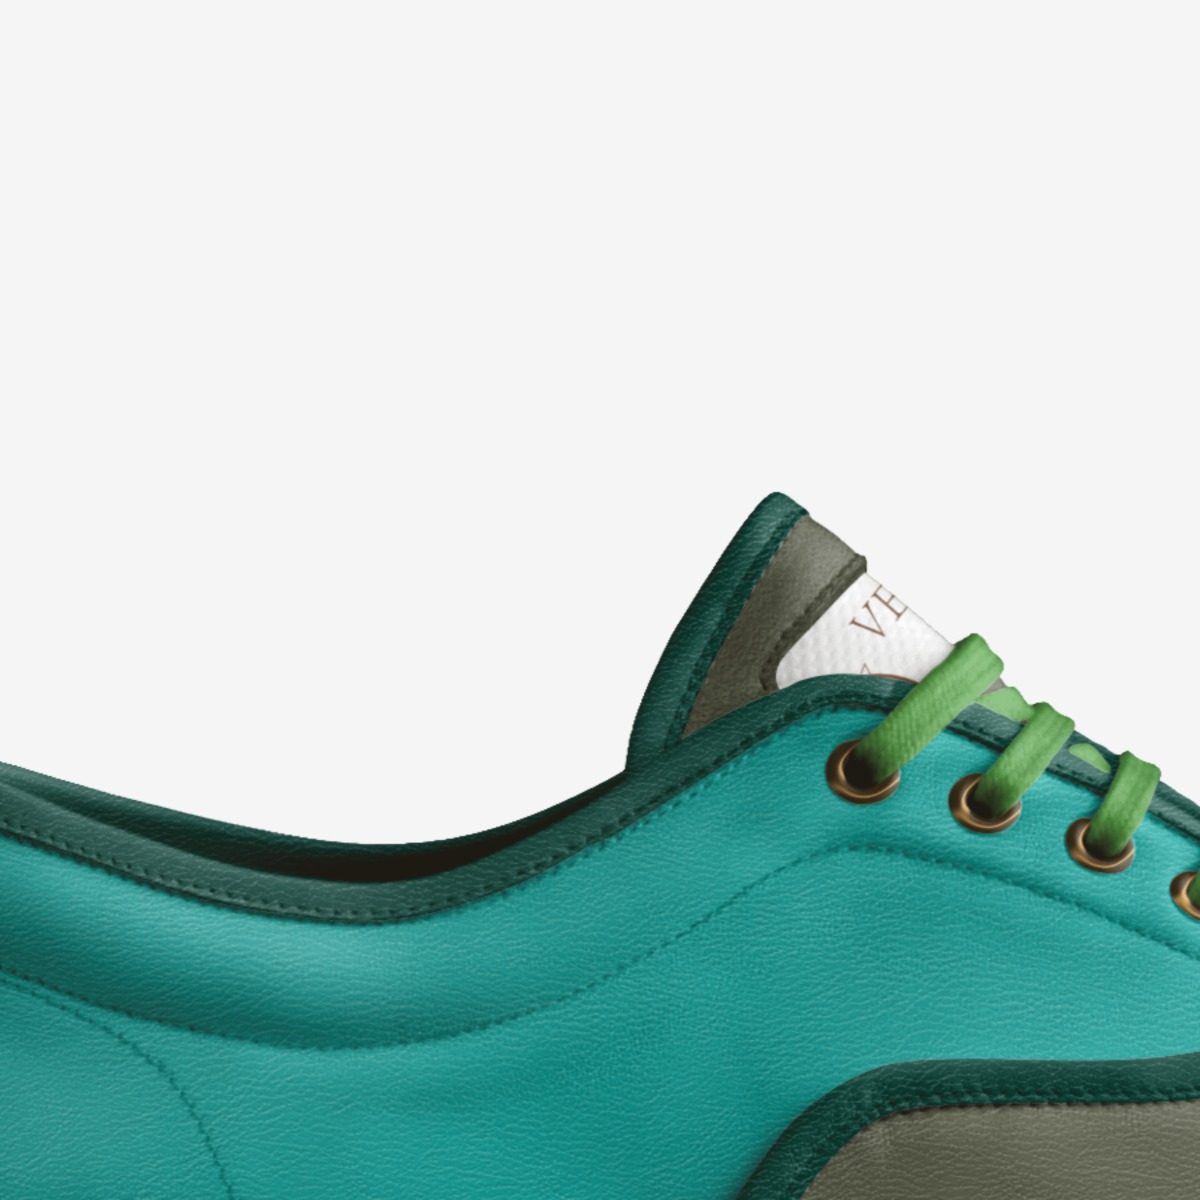 Venture by Paul | A Custom Shoe concept by Paul Flanigan